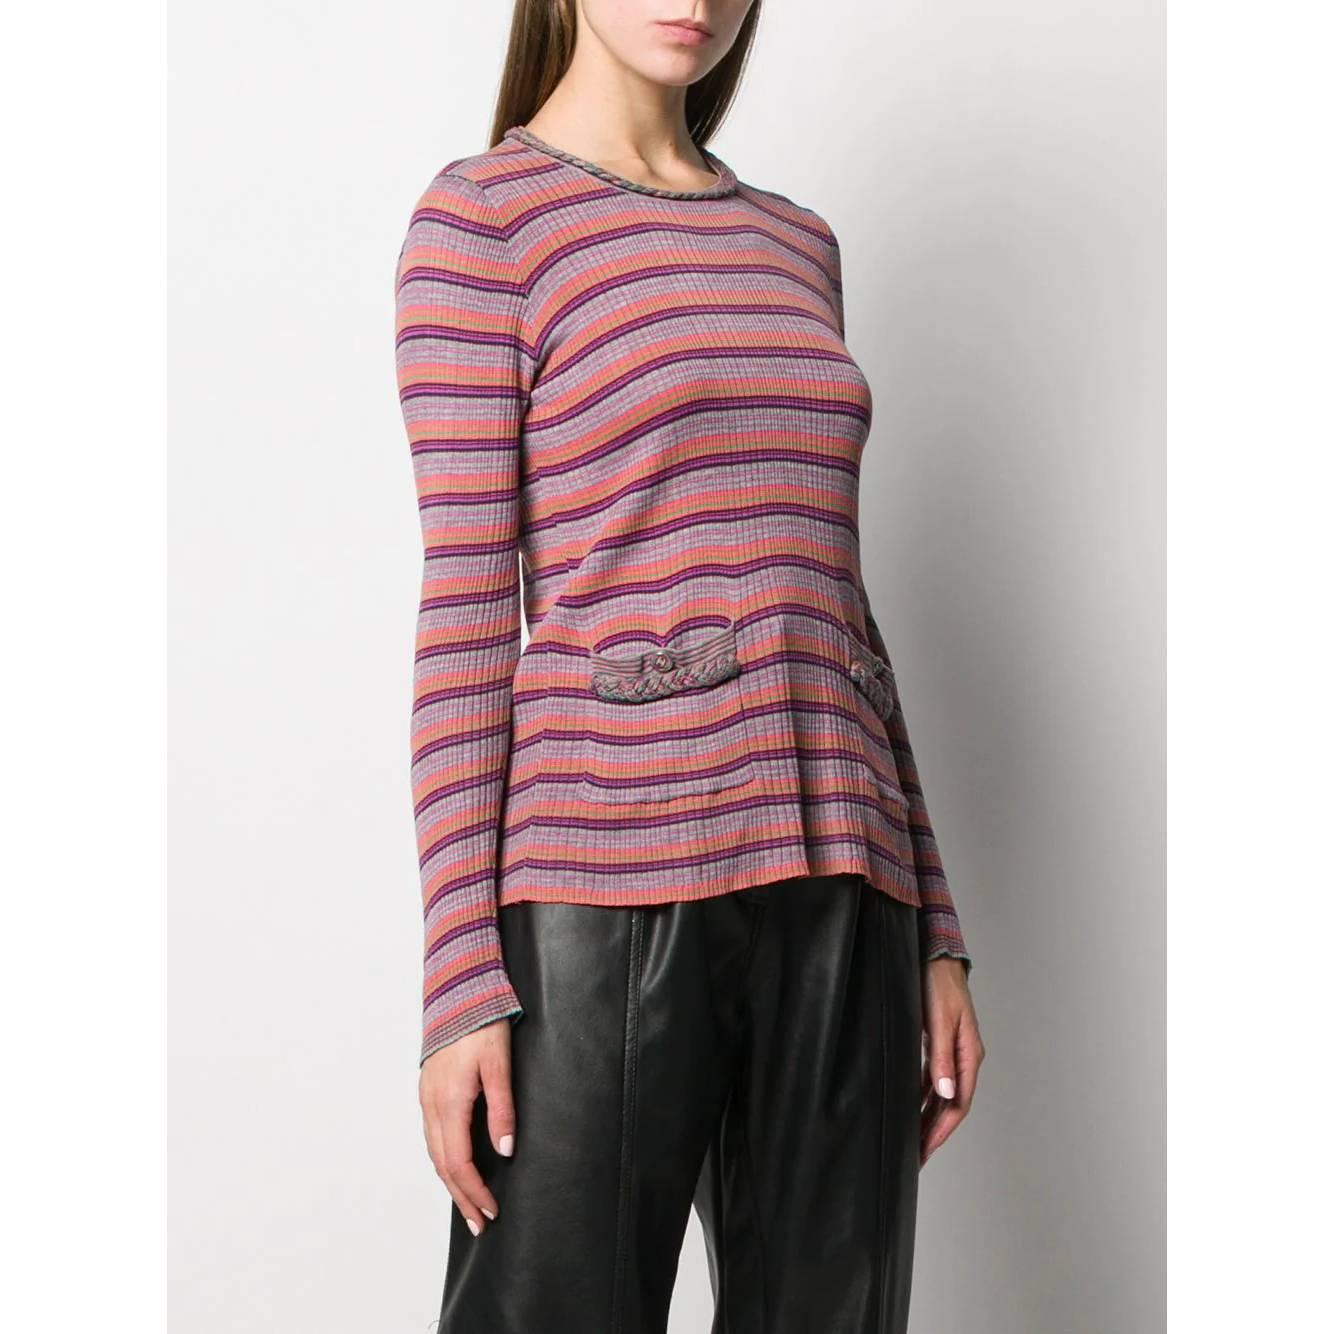 Chanel multicolor striped cotton blend lightweight sweater. Round neck, long sleeves and front patch pockets with logoed button.

Flat measurements
Height: 61 cm
Bust: 40 cm
Shoulders: 38 cm
Sleeves: 58 cm

Product code: A5787

Composition: 65%